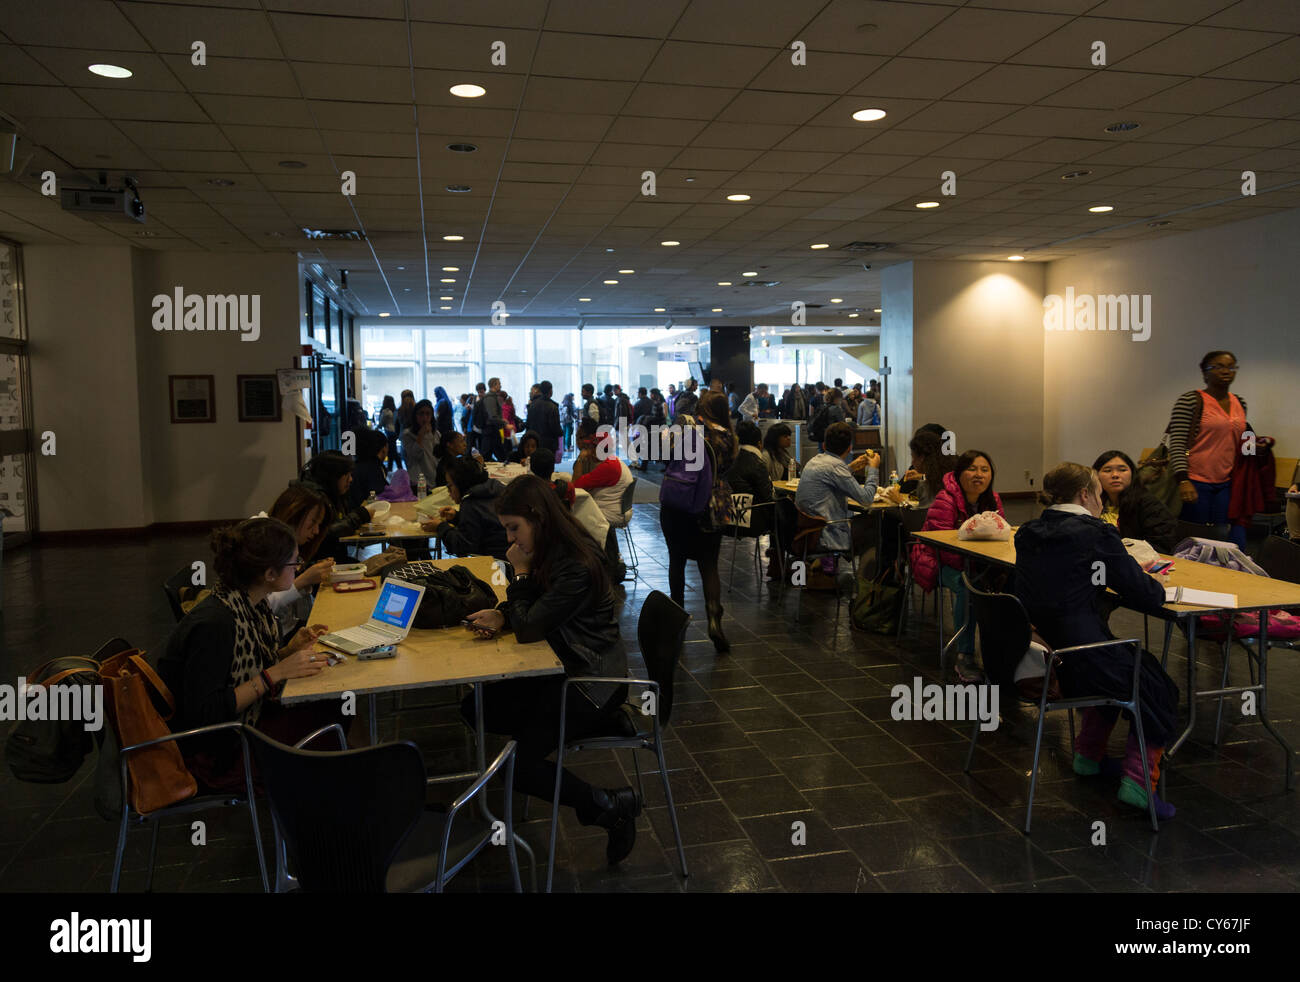 https://c8.alamy.com/comp/CY67JF/students-dining-tables-beside-starbucks-cafe-hunter-college-lexiington-CY67JF.jpg